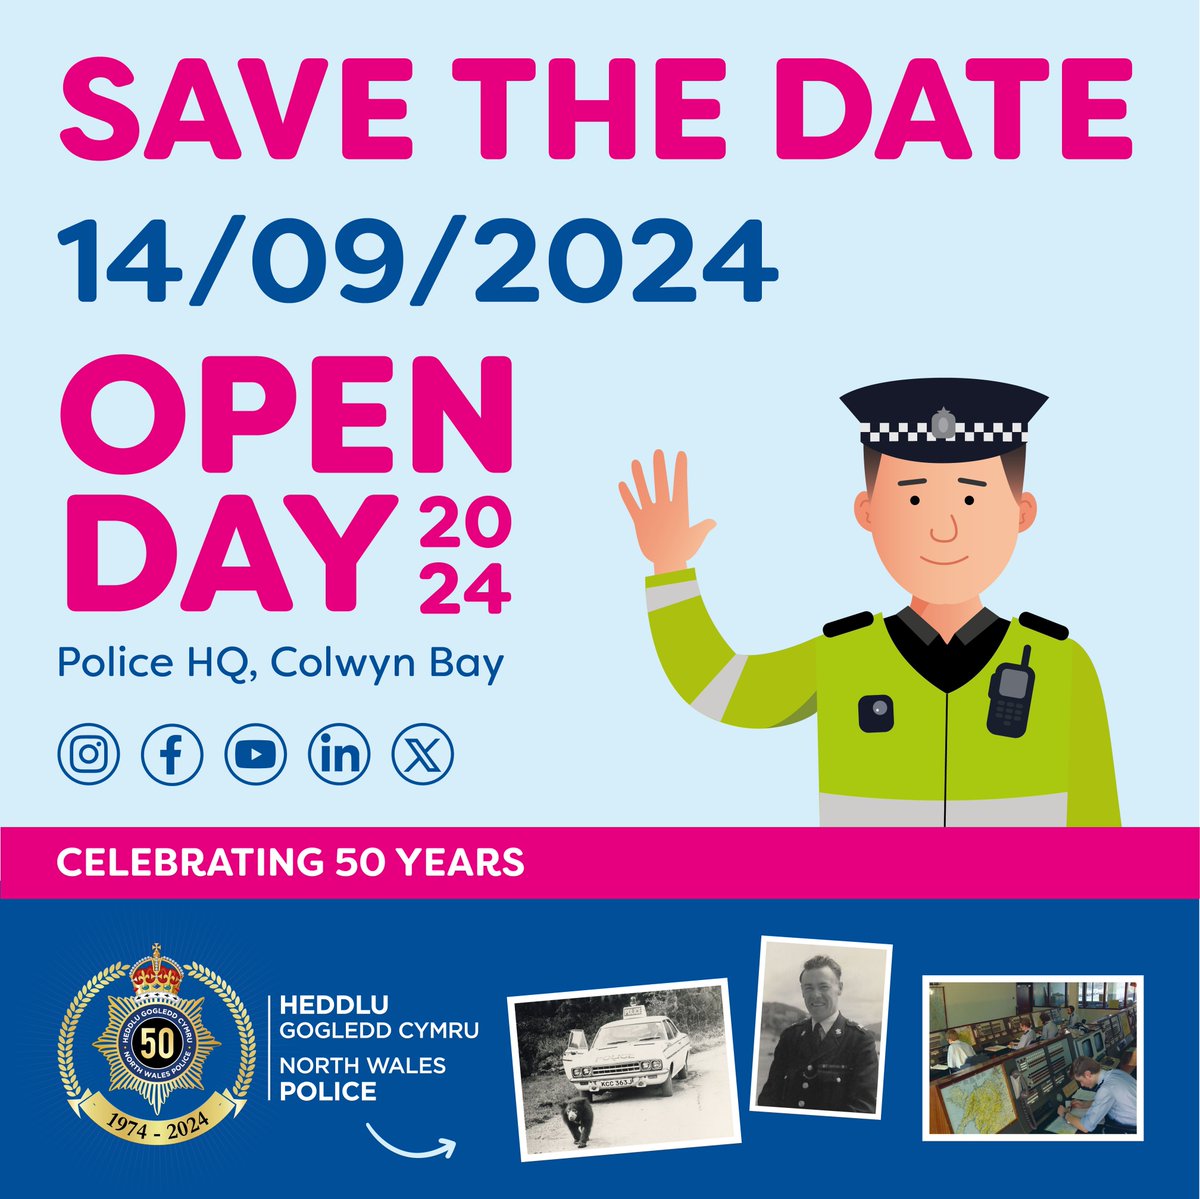 Happy 5️⃣ 0️⃣ th anniversary to us 🥳 Policing has occurred in North Wales for over 160 years but North Wales Police as we now know it was officially formed on 1st April 1974. Learn more via: orlo.uk/5sFk3 And please save the date! 👇🏼 💙 #NWP50